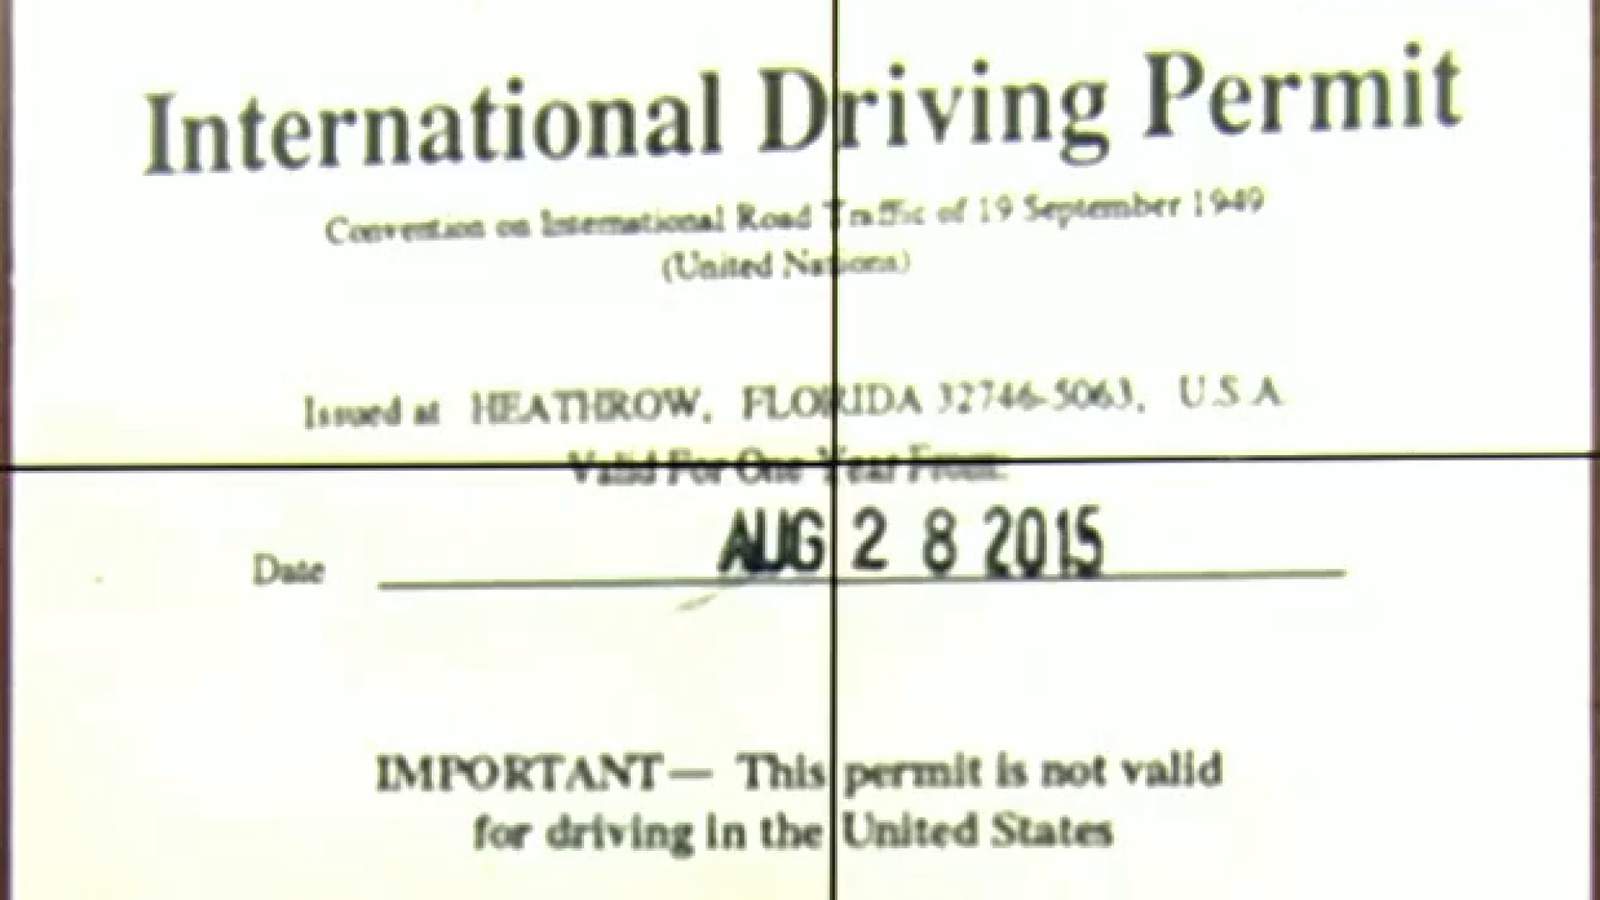 Ask Trooper Steve: What is an International Driving Permit?